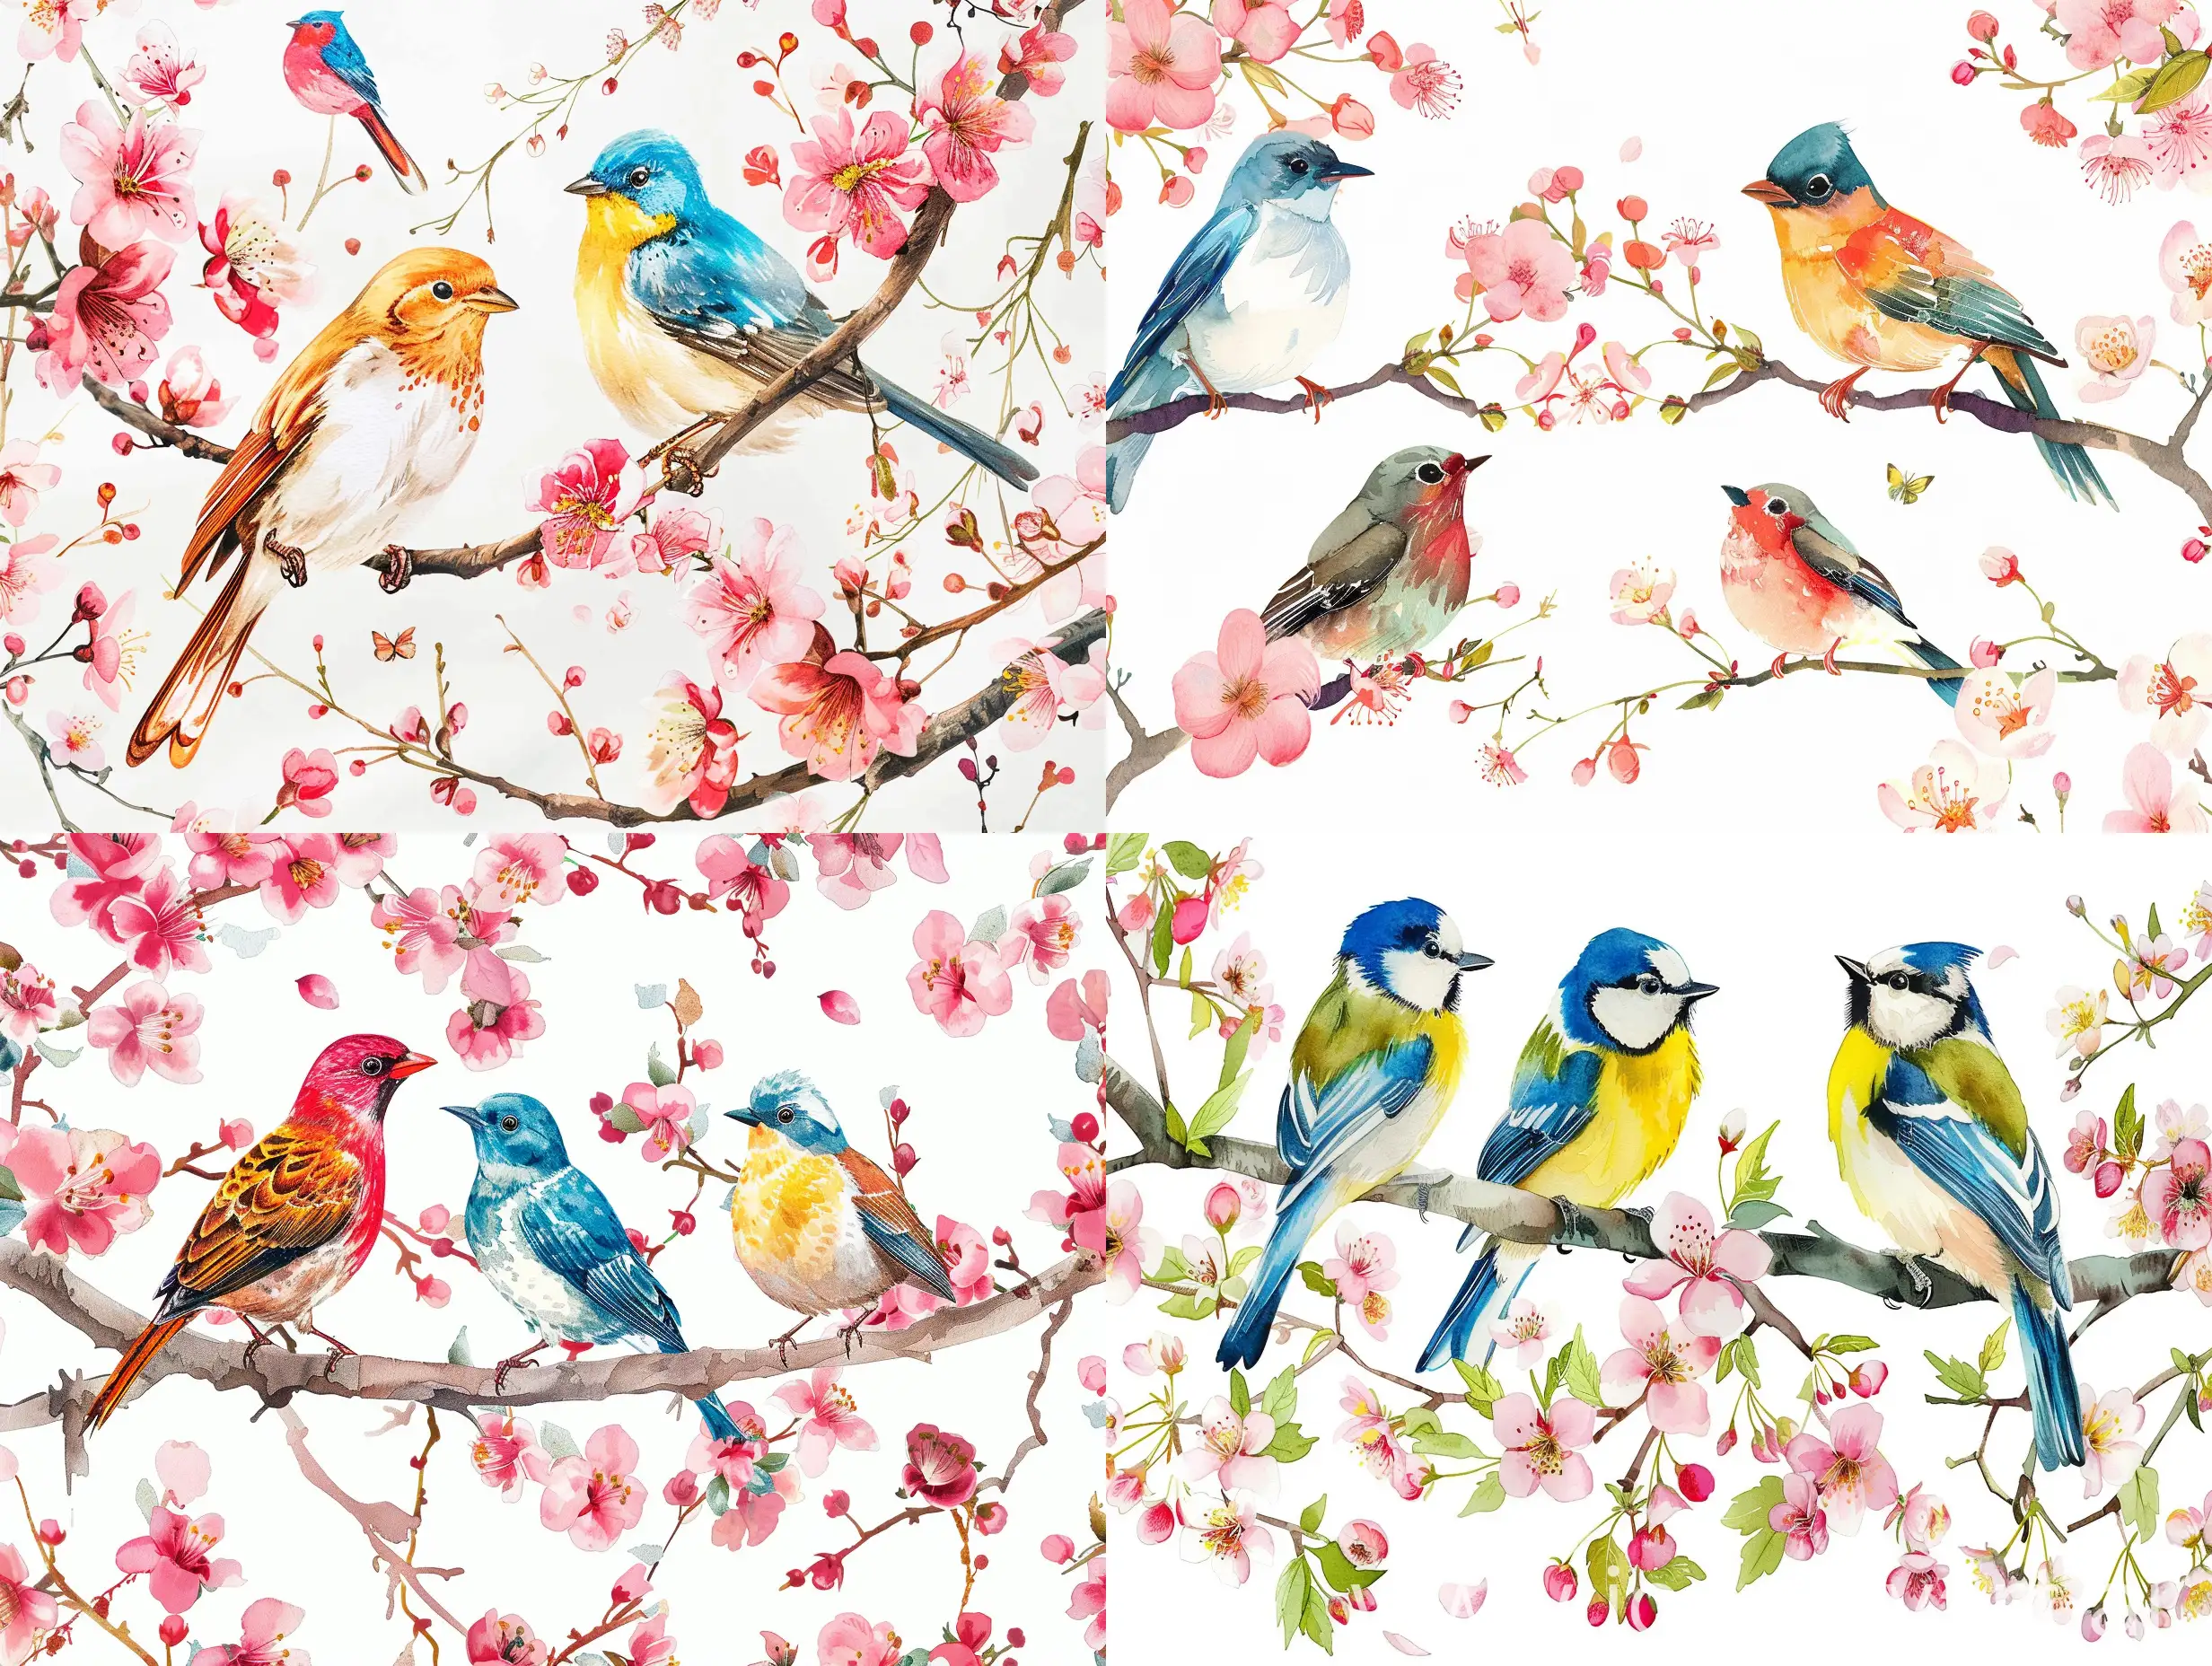 Colourful birds in blossoms on white background